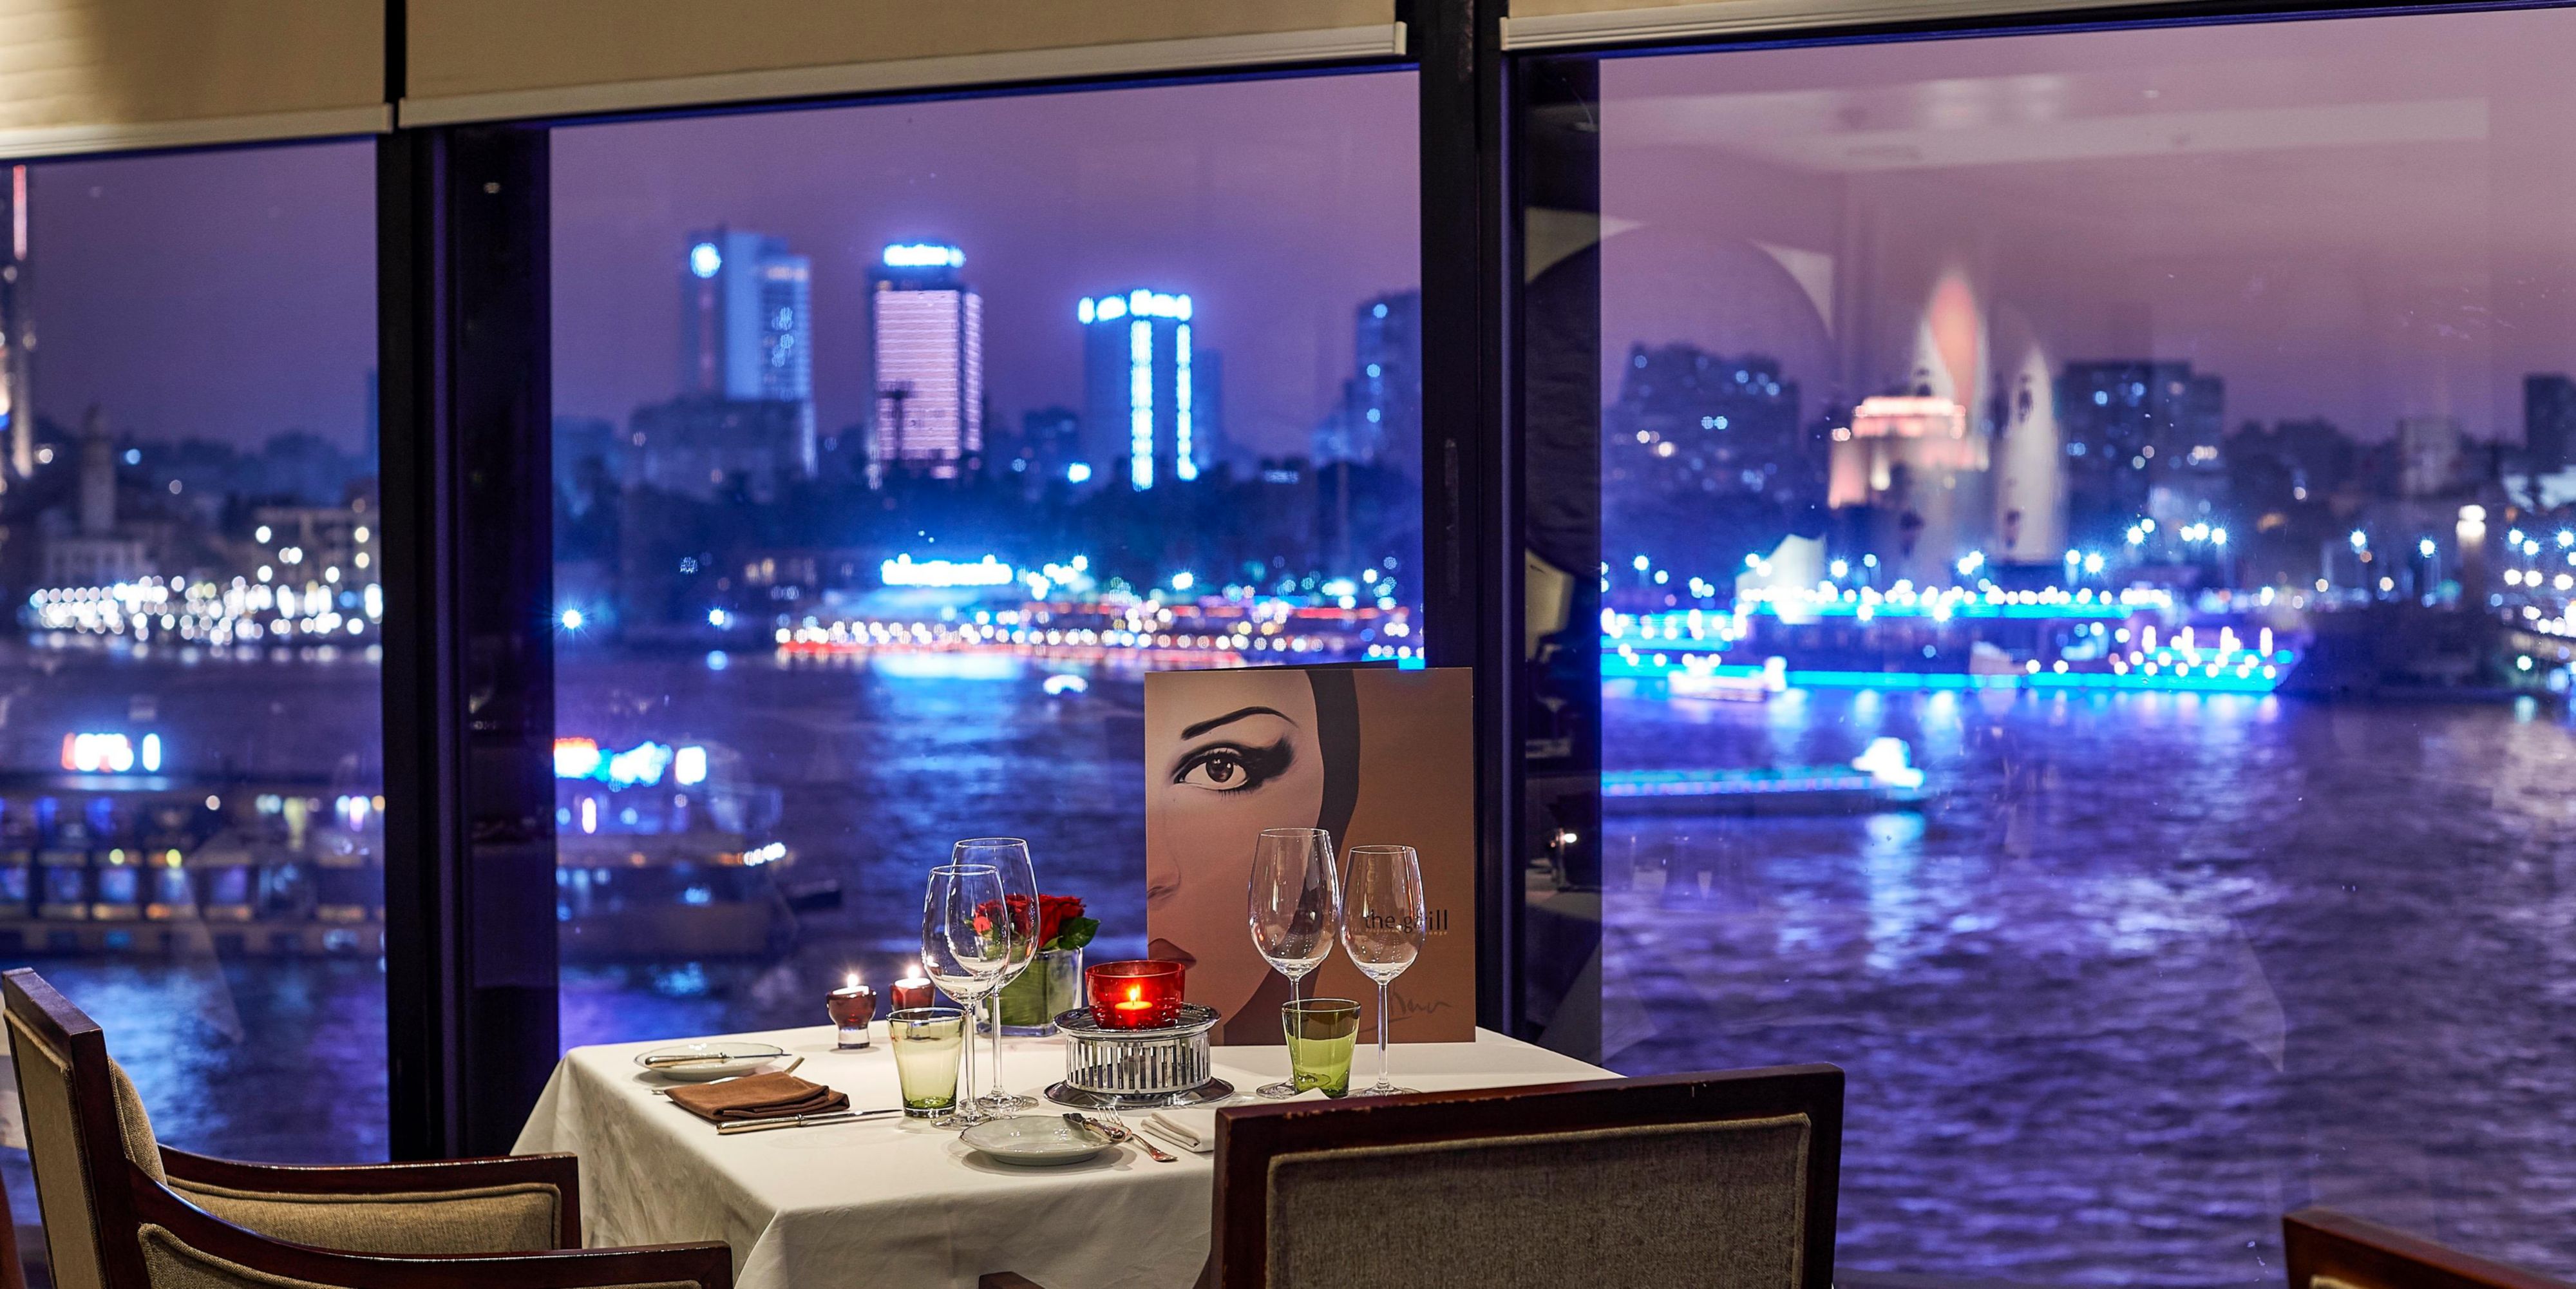 With it's panoramic Nile views, elegant seating and exquisite cuisine, the Grill is celebrated as one of the most romantic restaurants in Cairo! Open daily from 7 pm to midnight. To reserve your table, call 0227988188